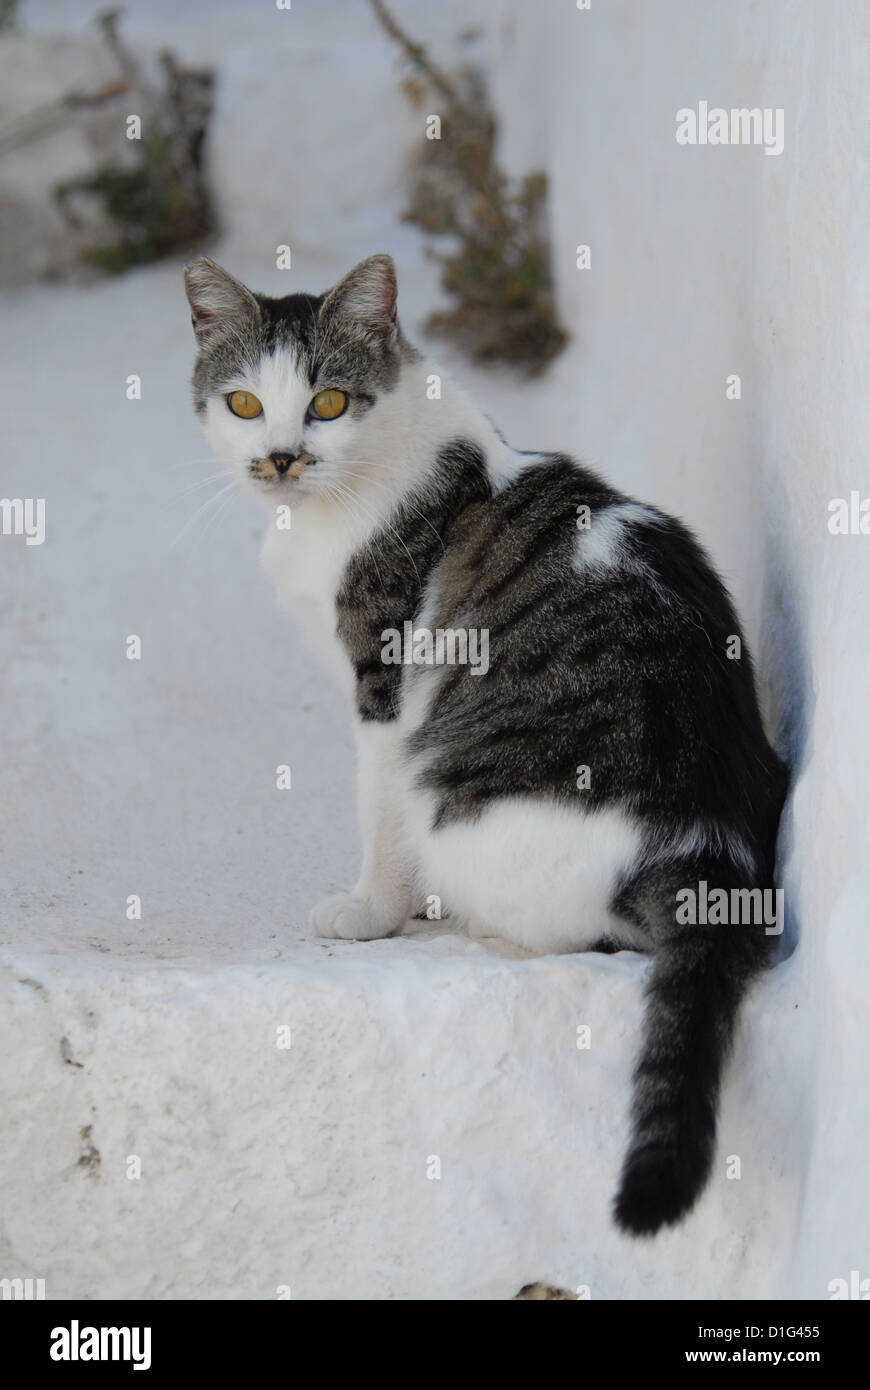 Tabby and White, sitting on a step, Greece, Dodecanese Island, Non-pedigree Shorthair, felis silvestris forma catus, domesticus Stock Photo